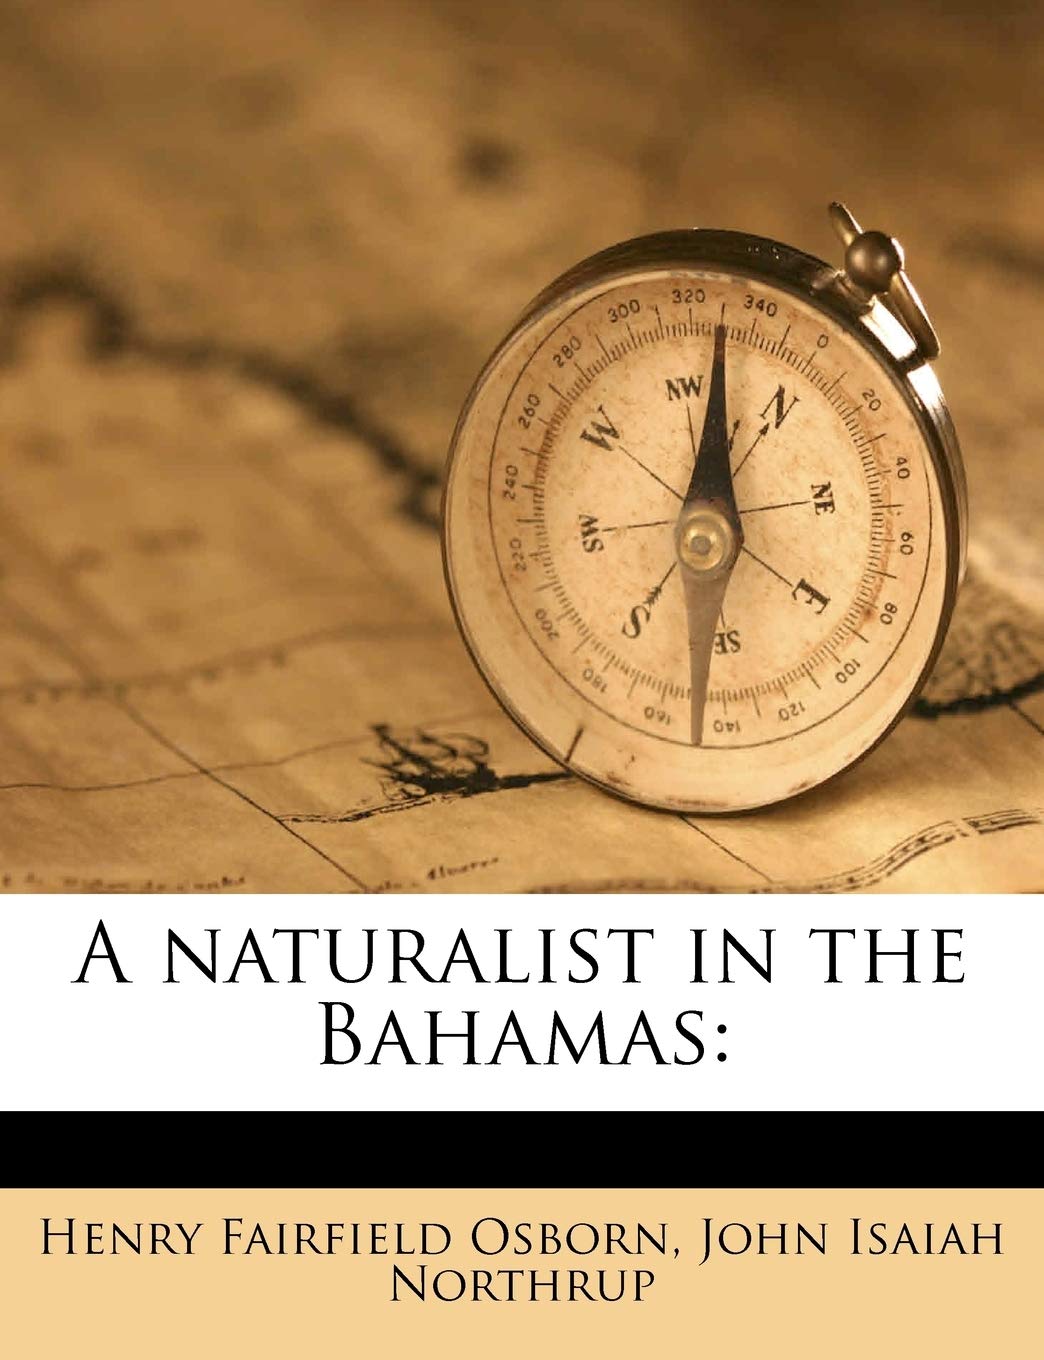 A Naturalist in the Bahamas